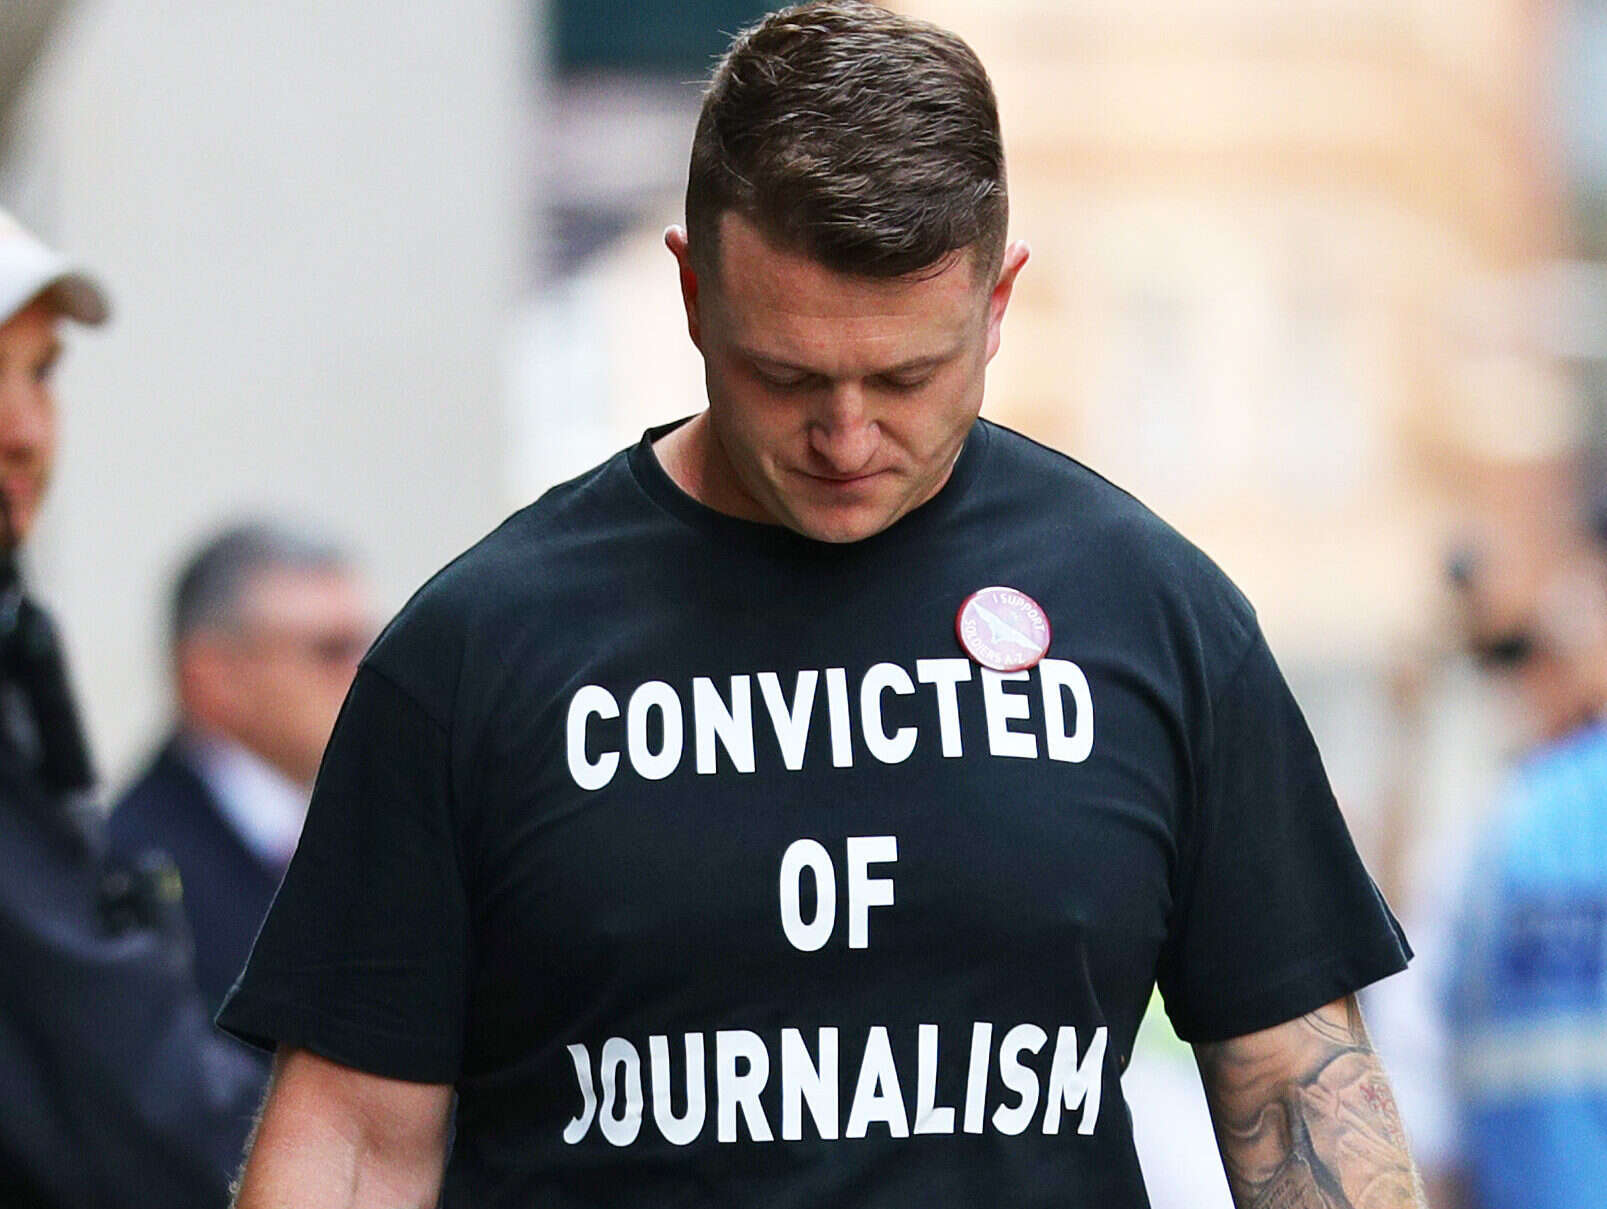 Tommy Robinson's 'convicted of journalism' t-shirt slogan claim a 'farce', say editors